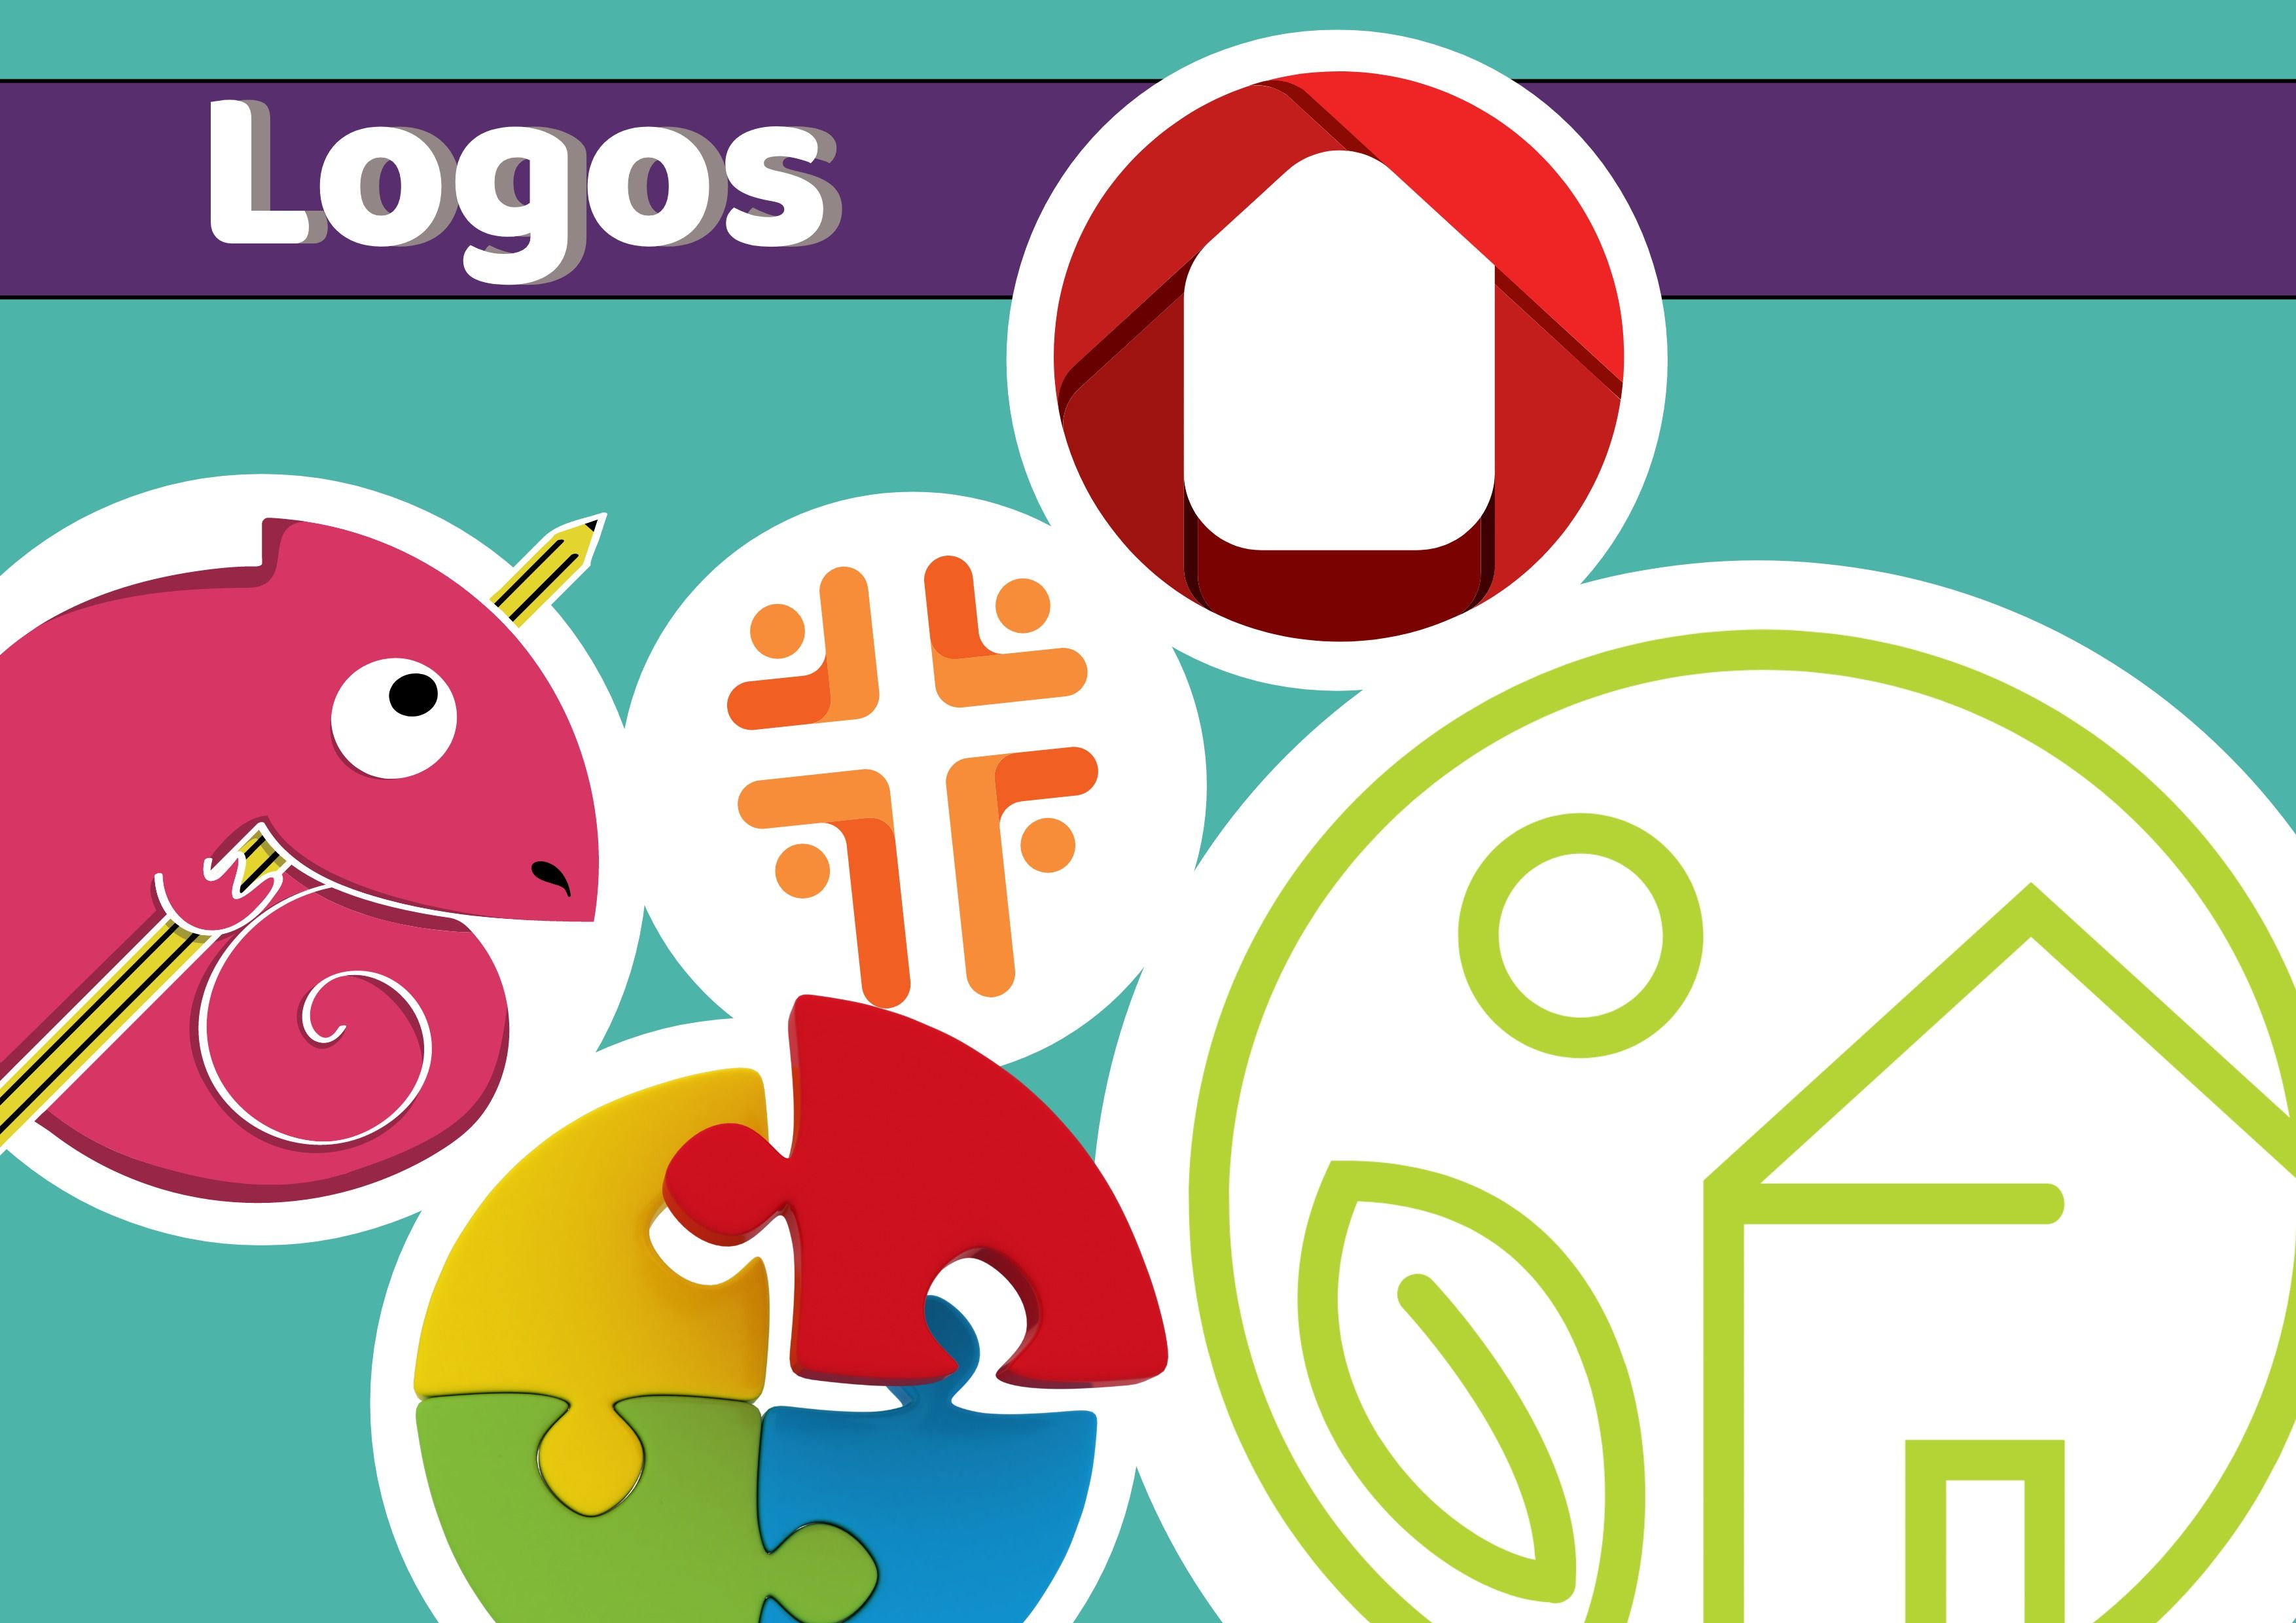 Logos image including colorful circular logo examples - Logo guidelines - Image